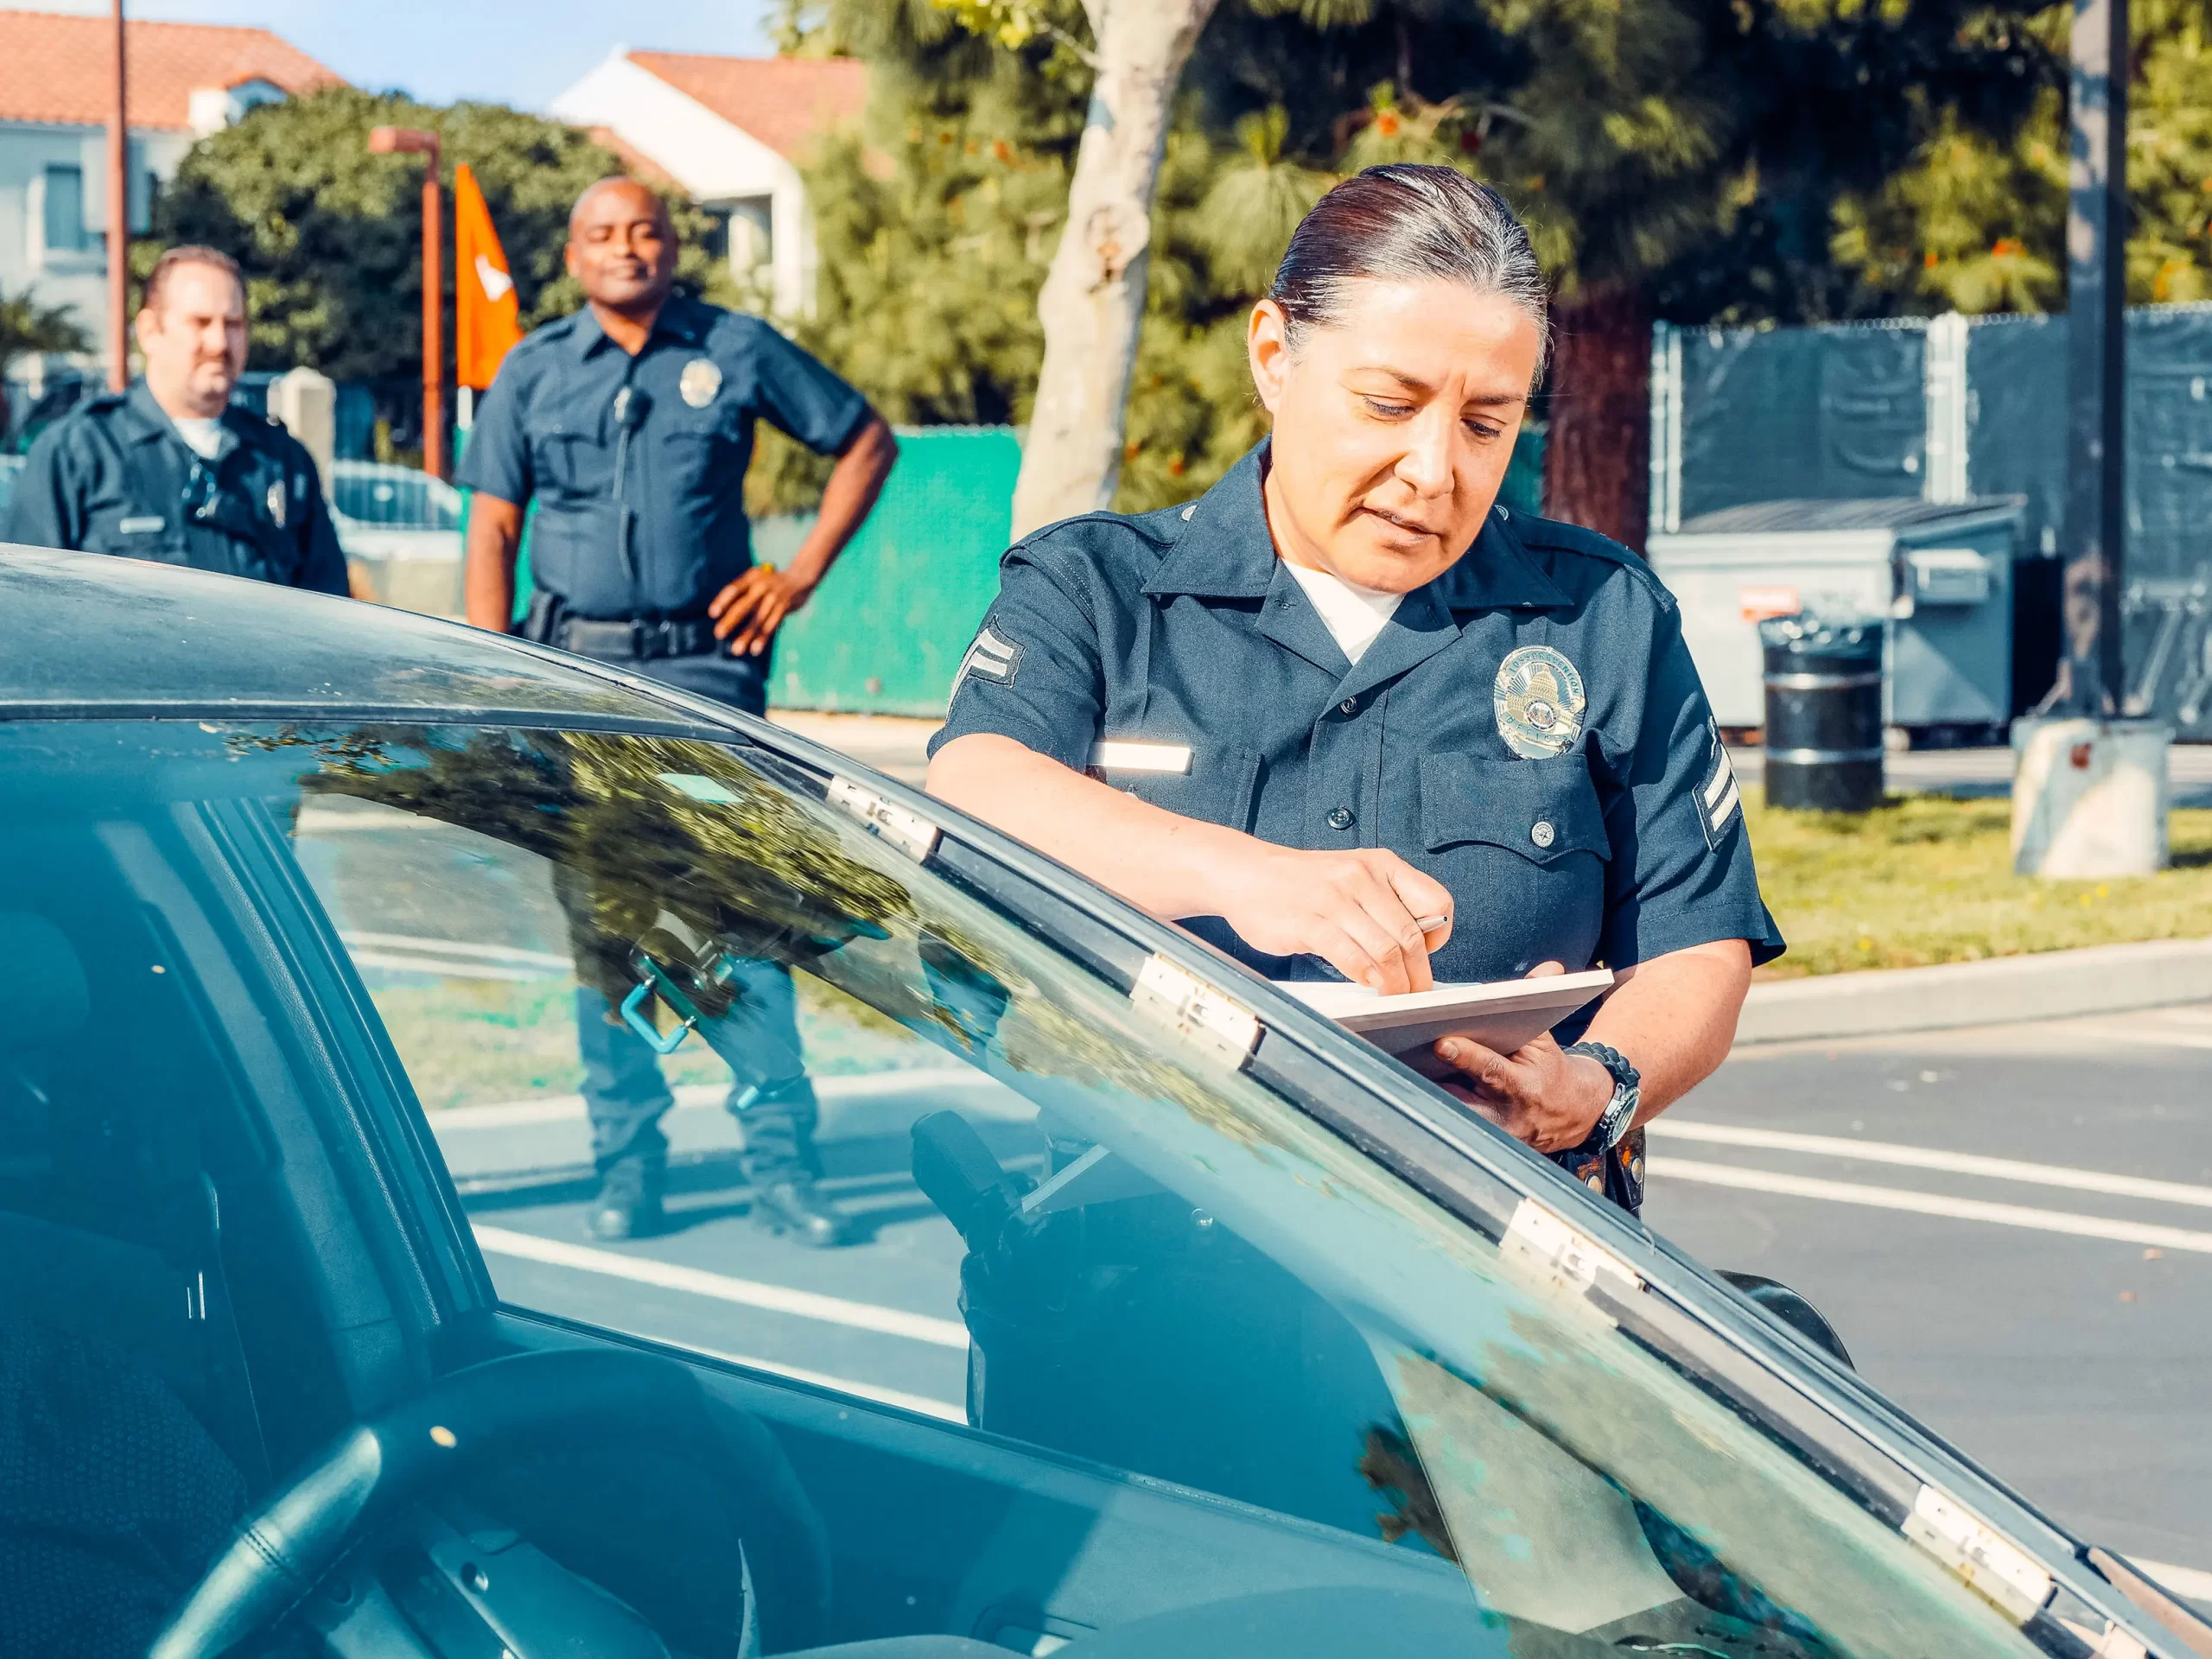 A female cop writing a ticket while two other cops wait in the background.